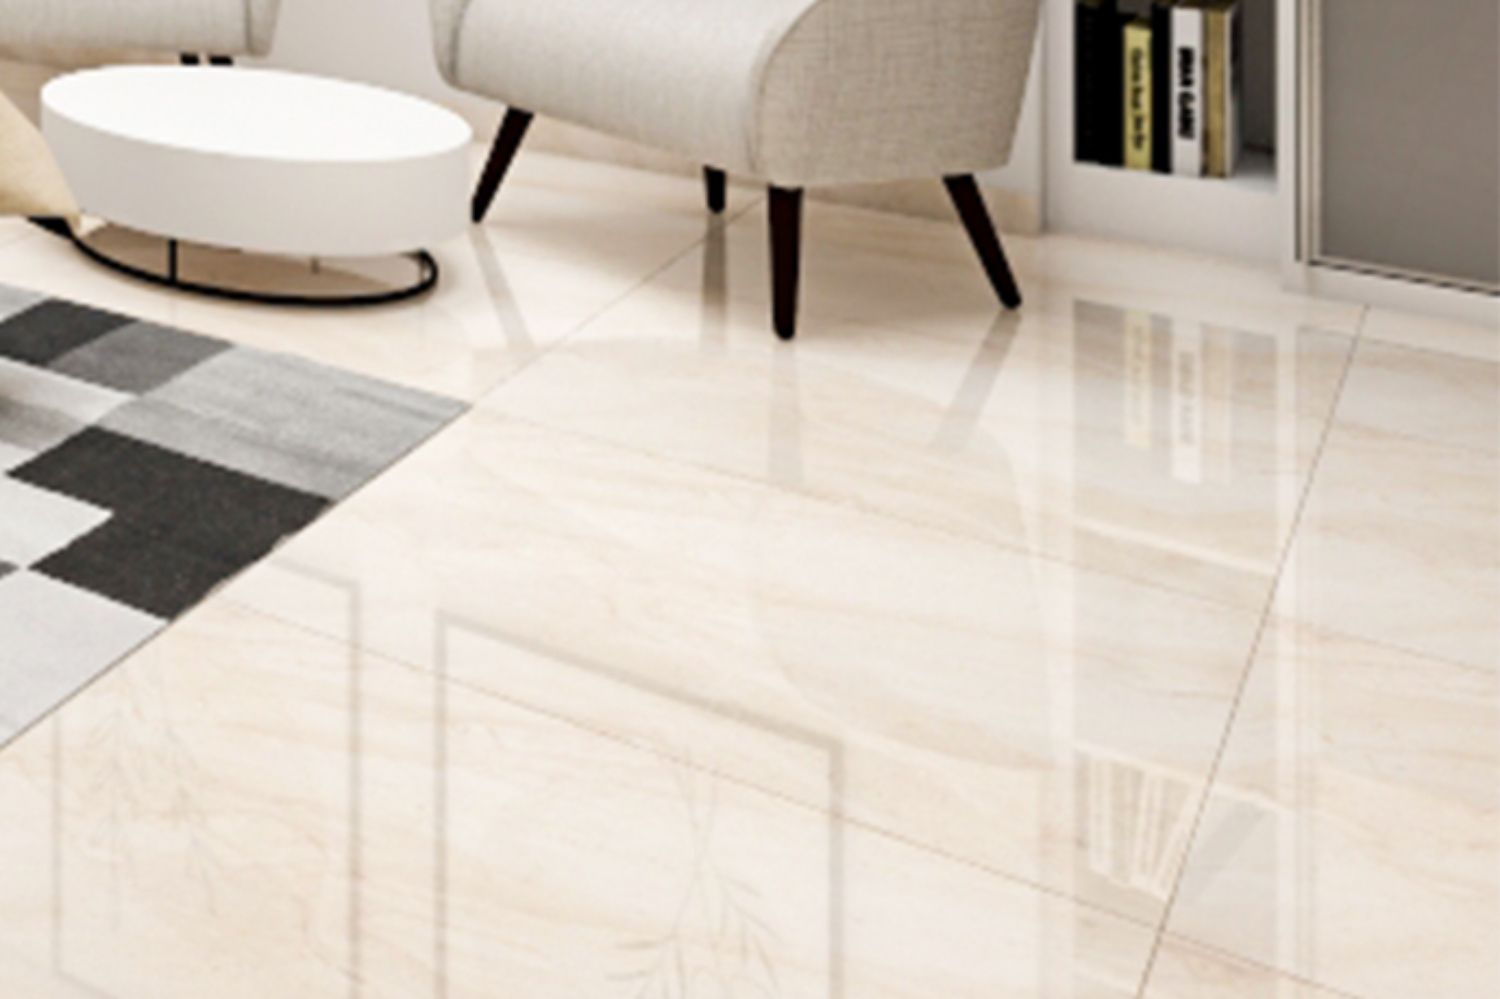 Modern Beige Flooring Design With A Glossy Finish